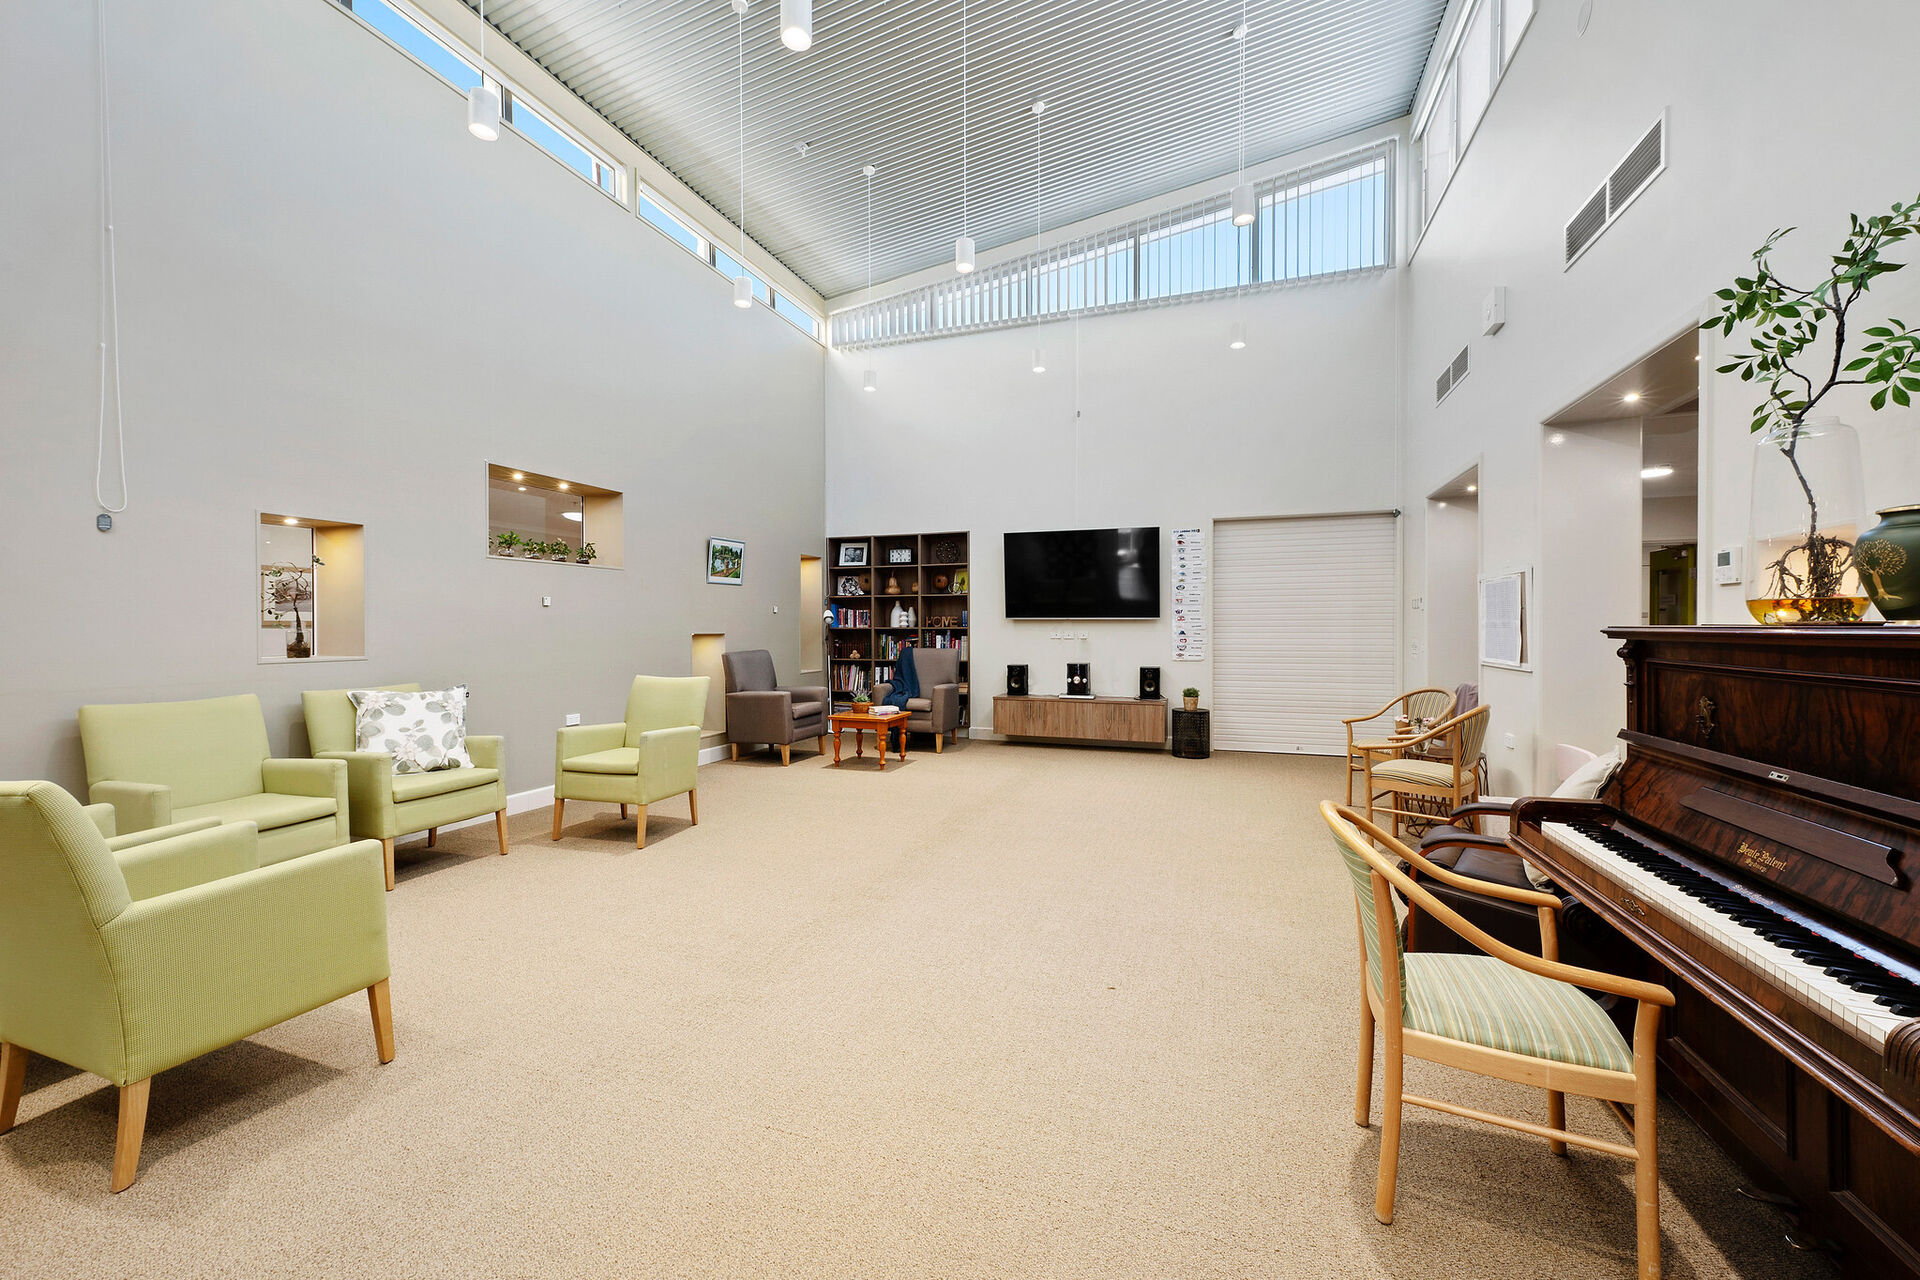 spacious sitting area for nursing home residents at baptistcare niola centre aged care home in parkes nsw